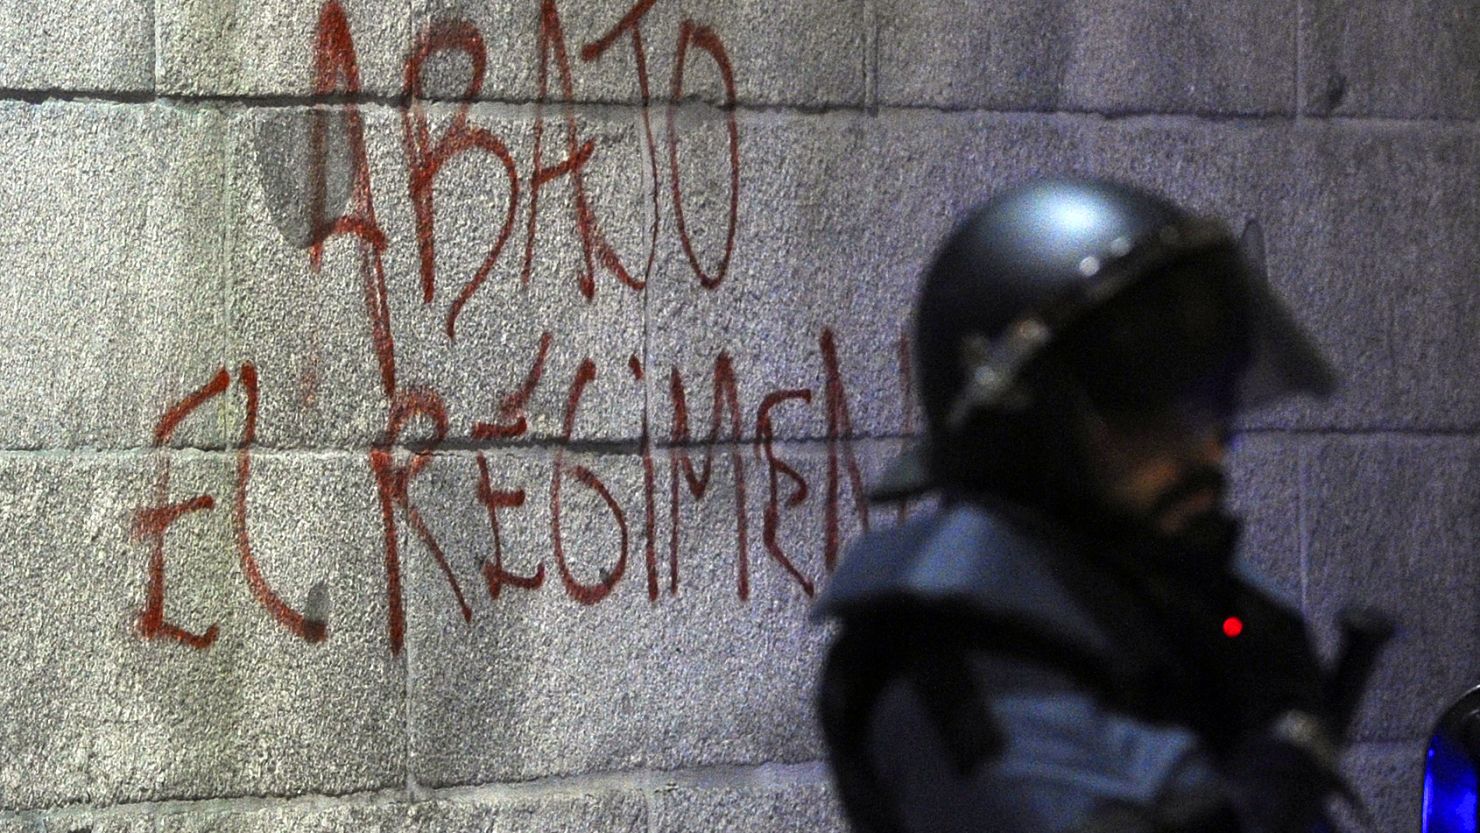 Graffiti says "Down with the regime" on Spain's parliament building near a riot officer during a protest before elections this month.